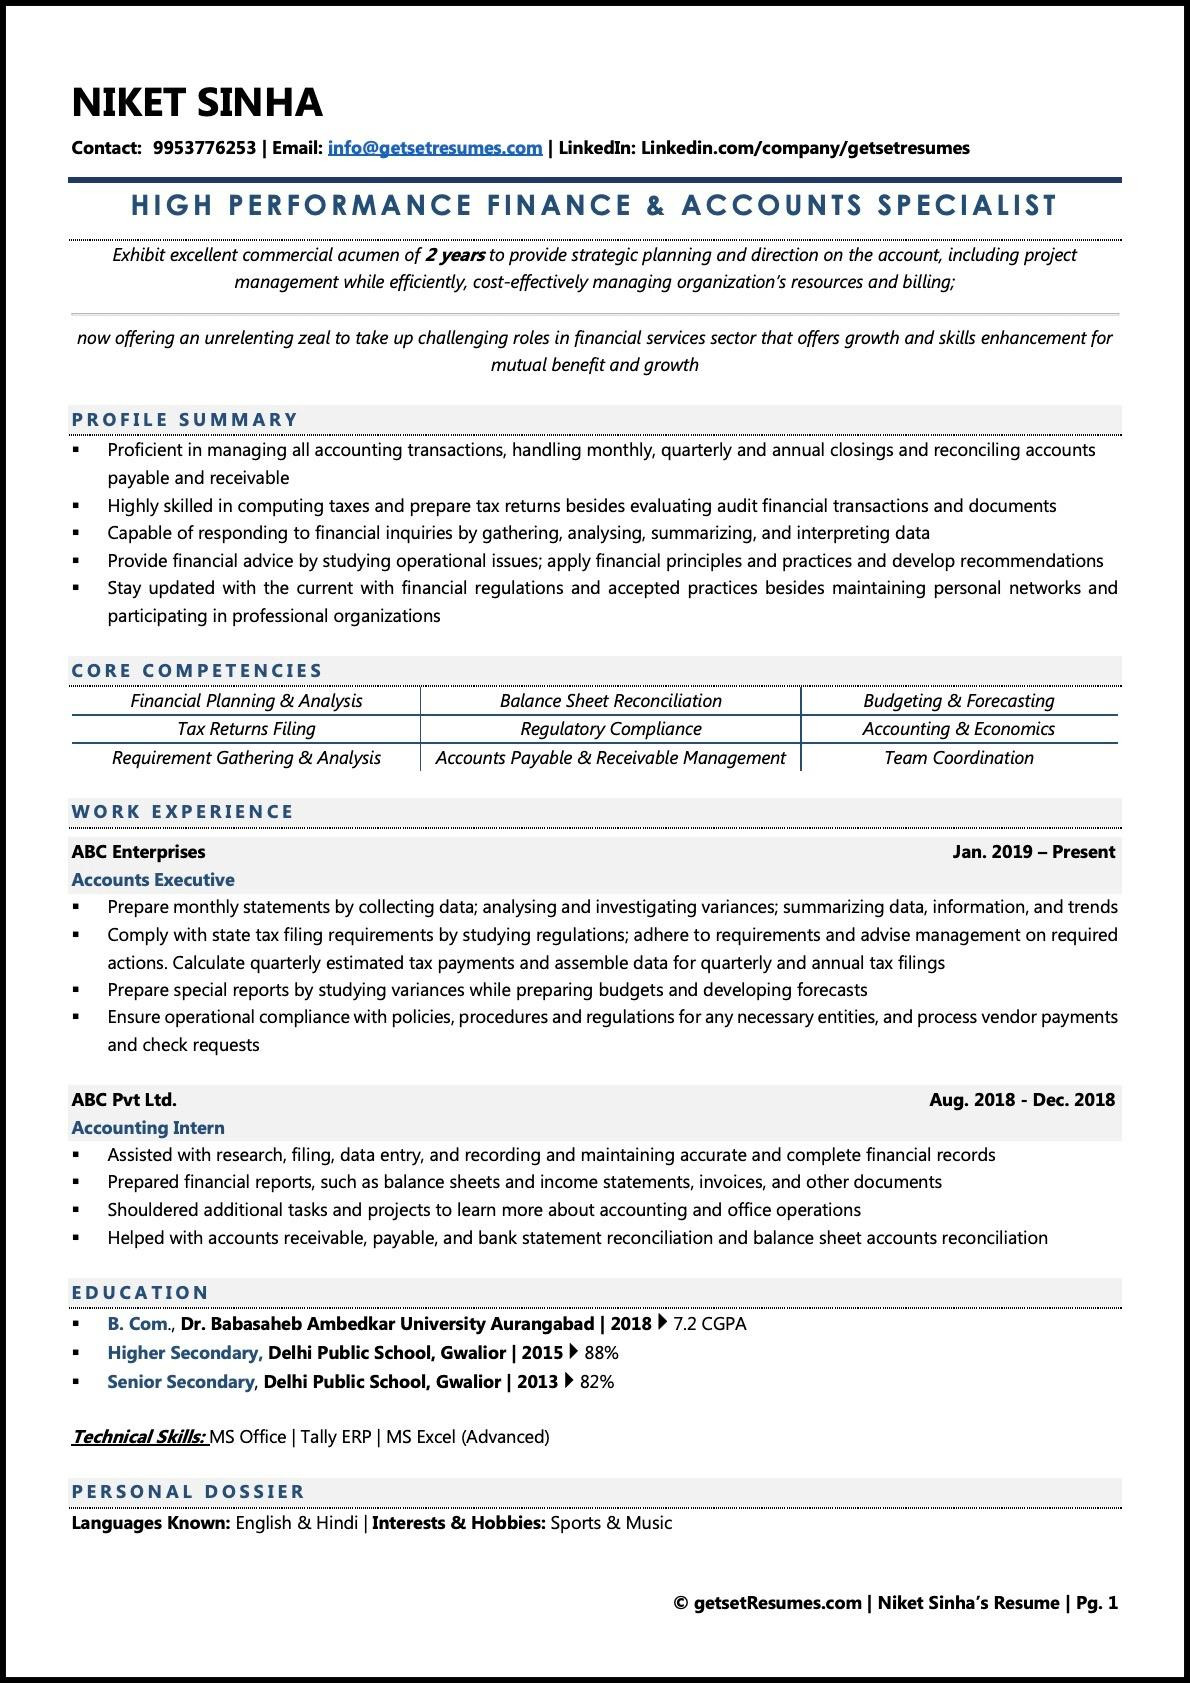 Sample Resume for Accounts and Finance In India Accounts Executive Resume Examples & Template (with Job Winning Tips)